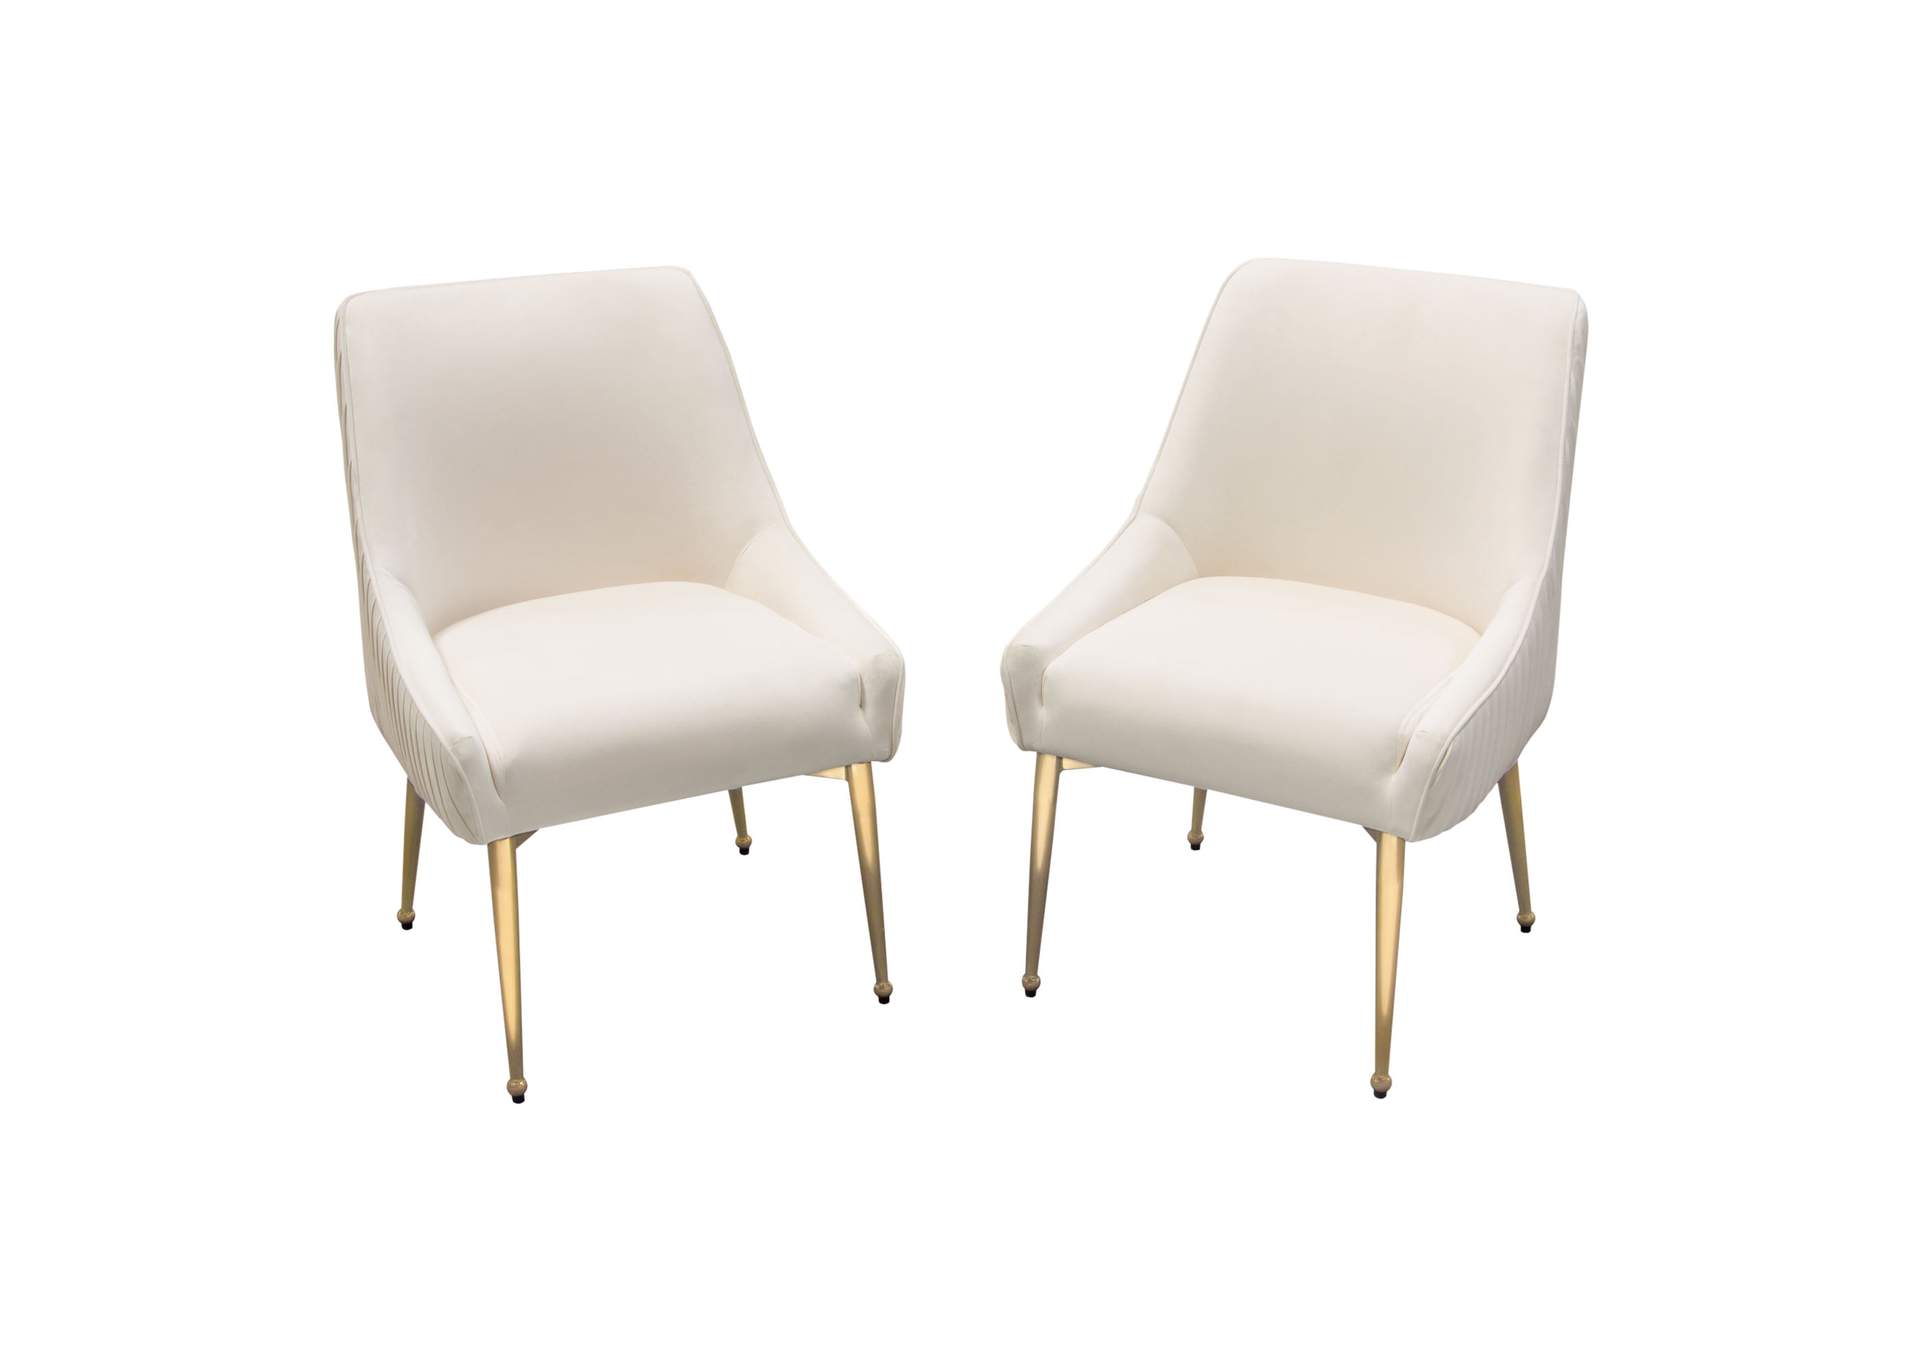 Set of (2) Quinn Dining Chairs w/ Vertical Outside Pleat Detail and Contoured Arm in Cream Velvet w/ Brushed Gold Metal Leg by Diamond Sofa,Diamond Sofa